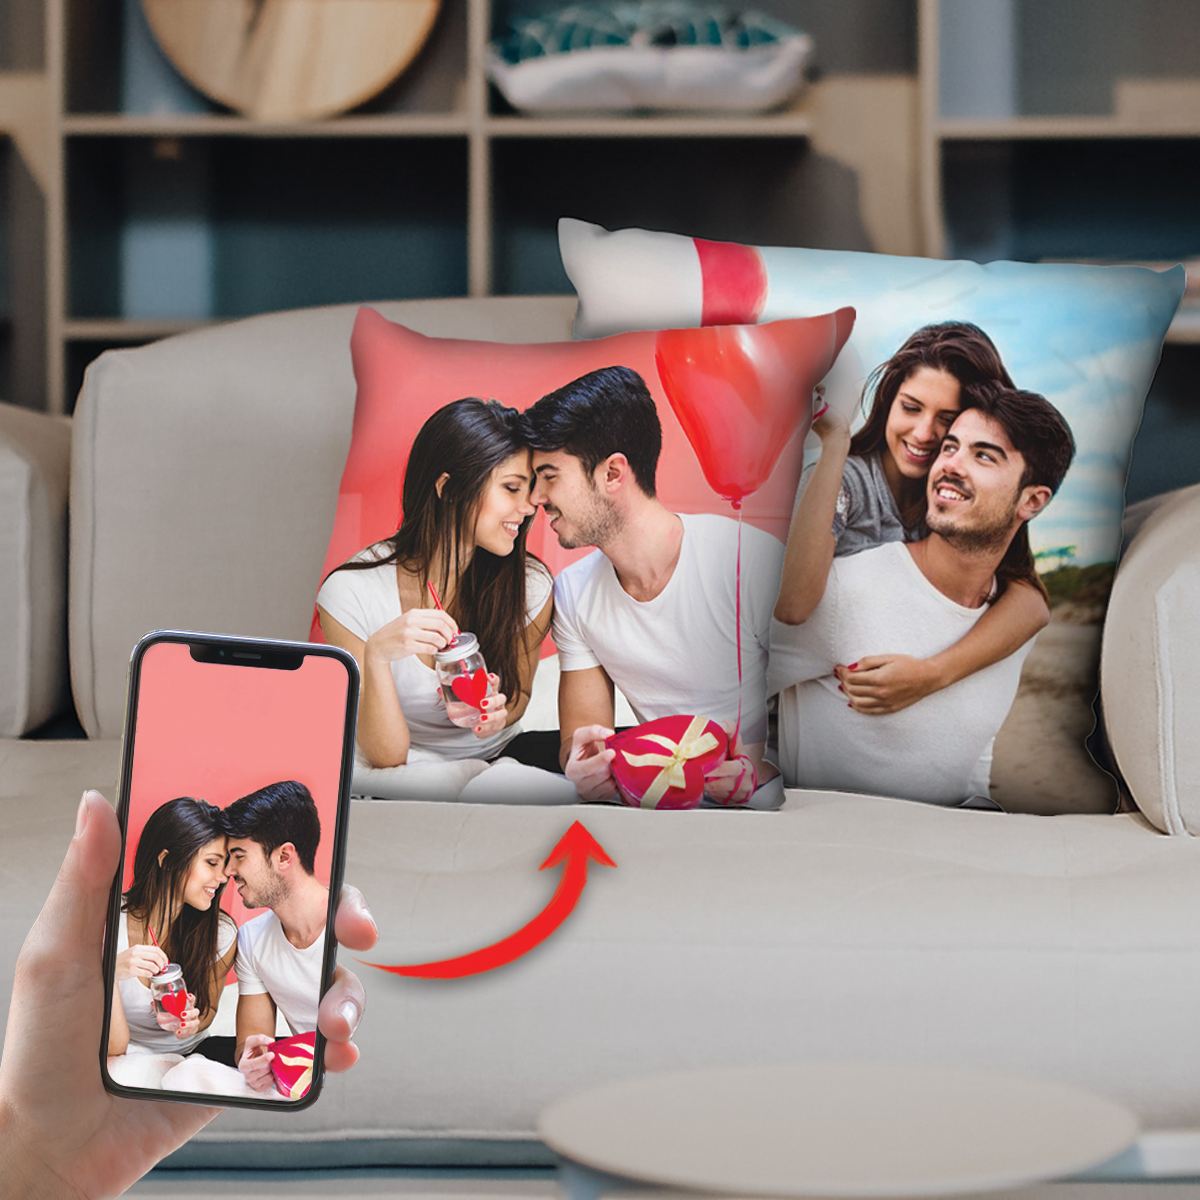 Happy Together - Personalized Pillow Cases (Set of 2) With Your Family's Photos